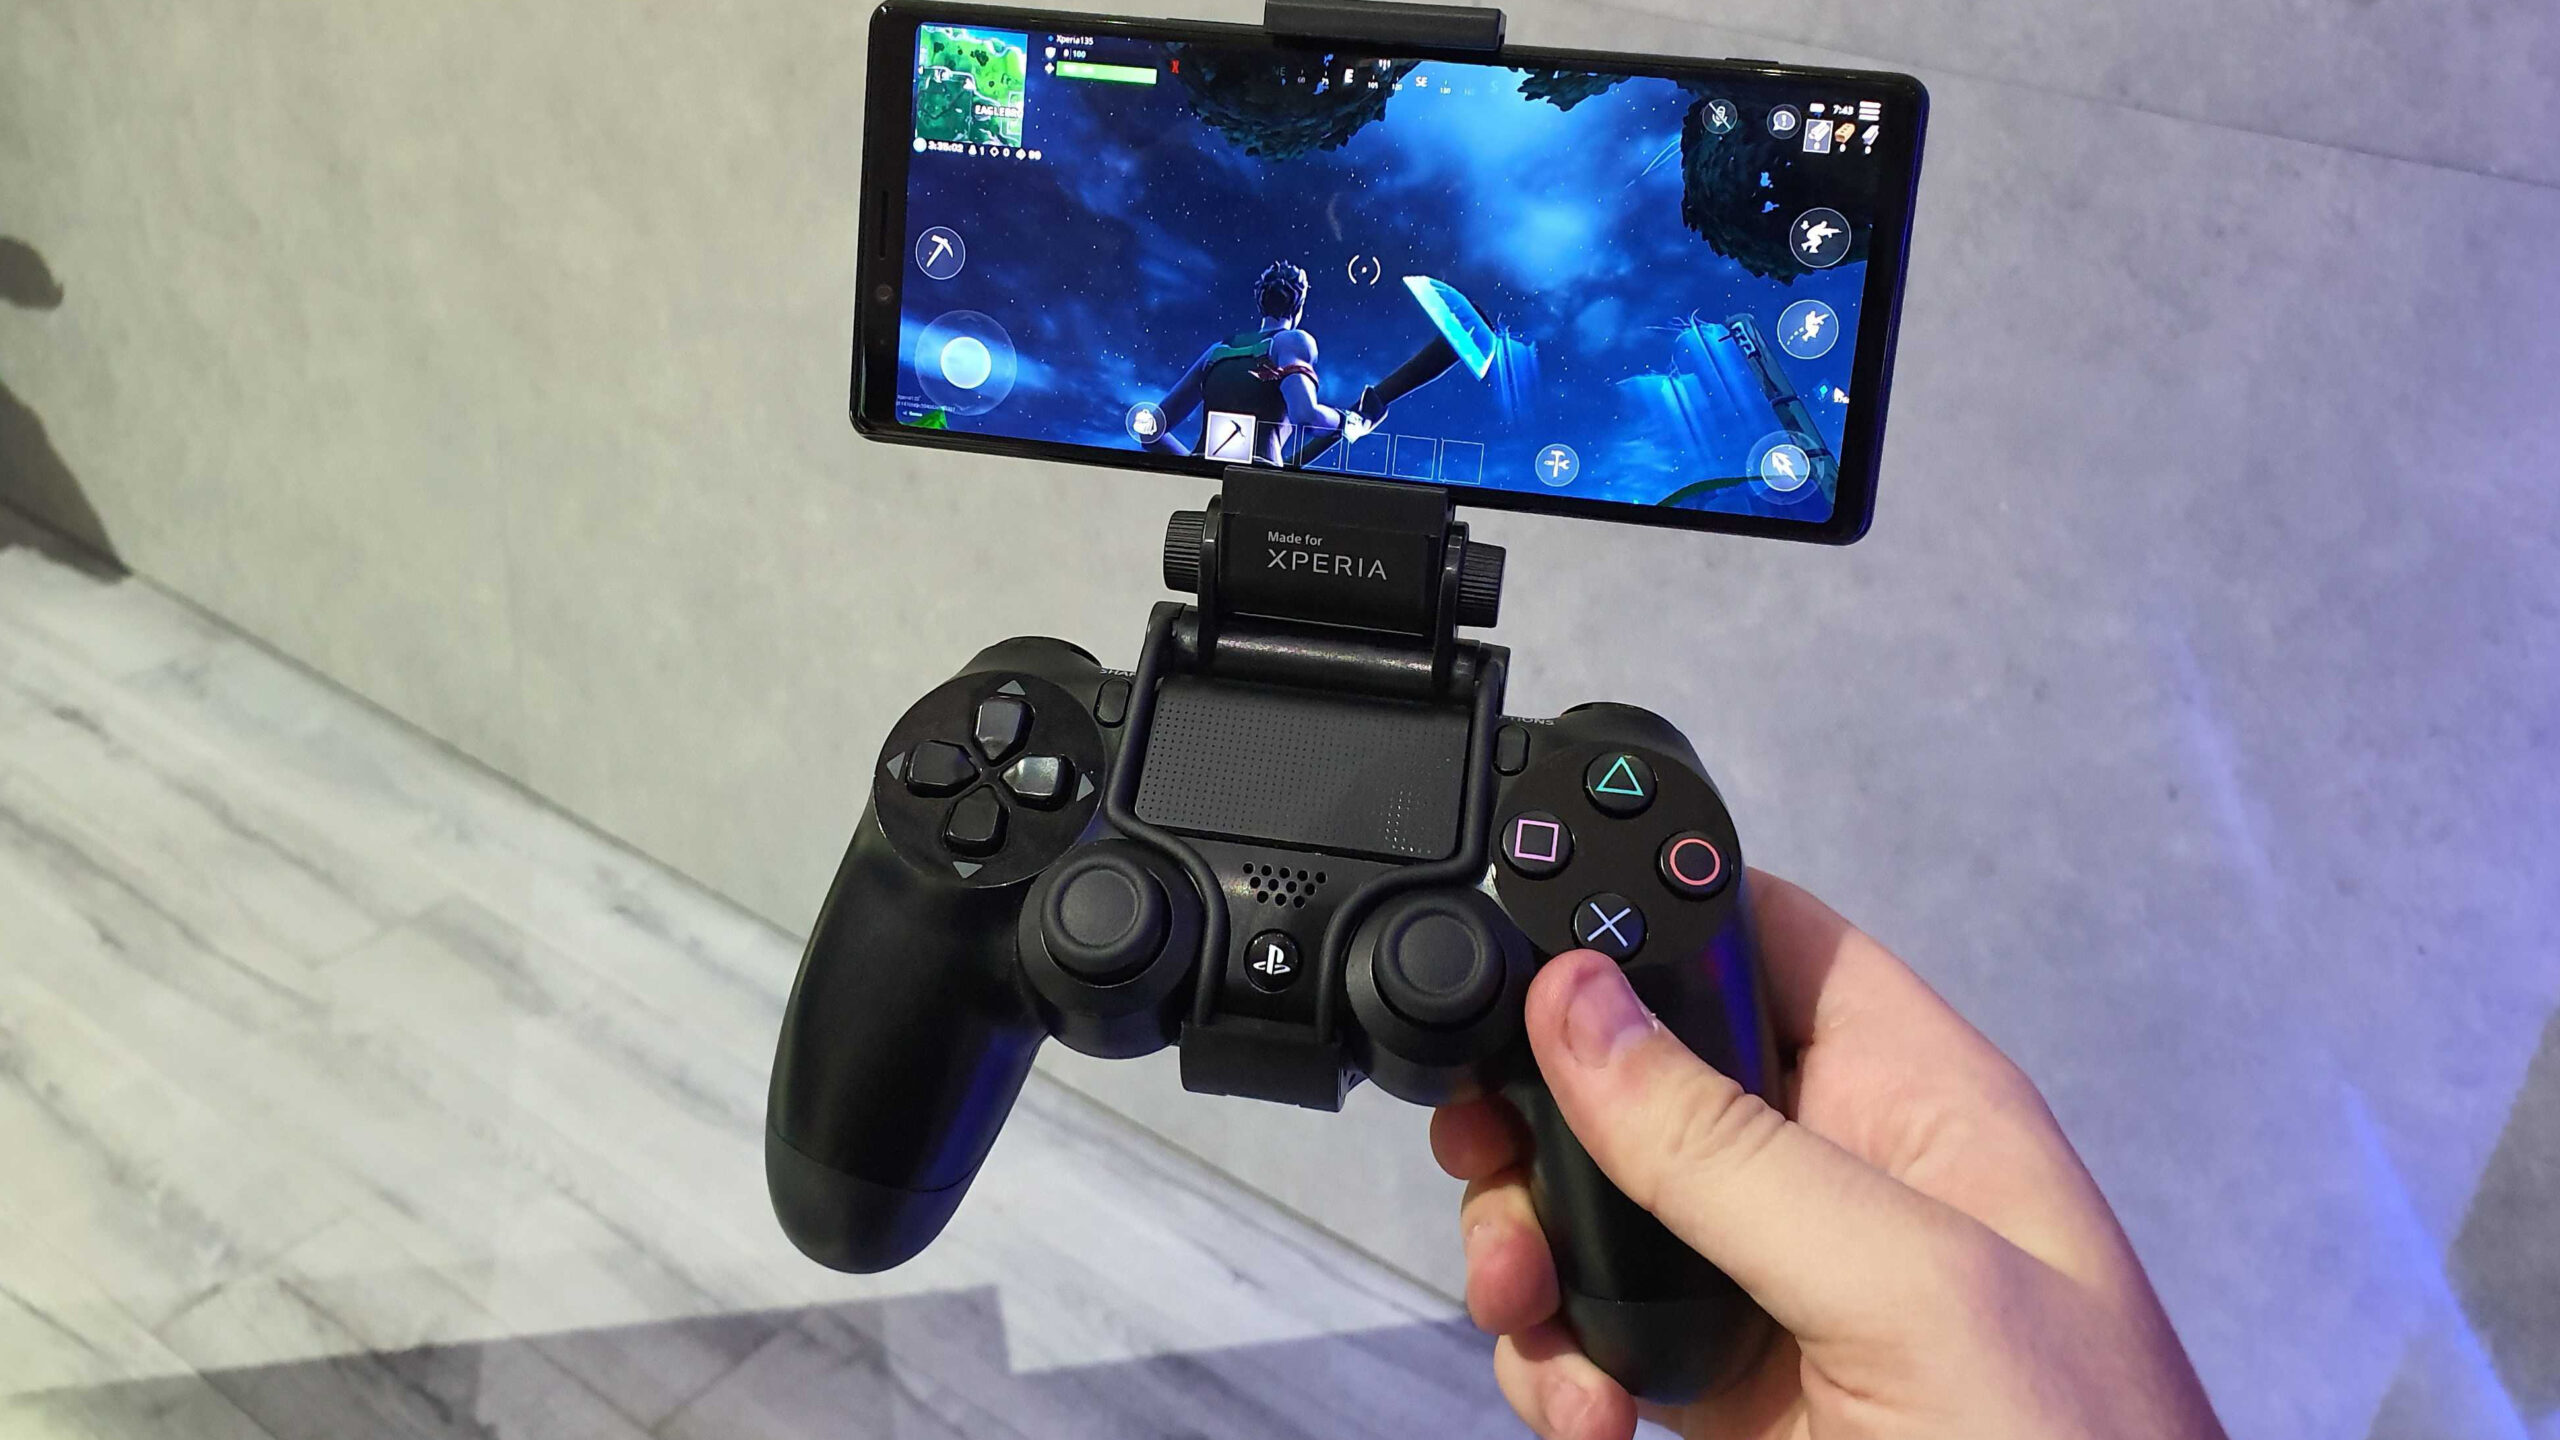 controller connected with phone